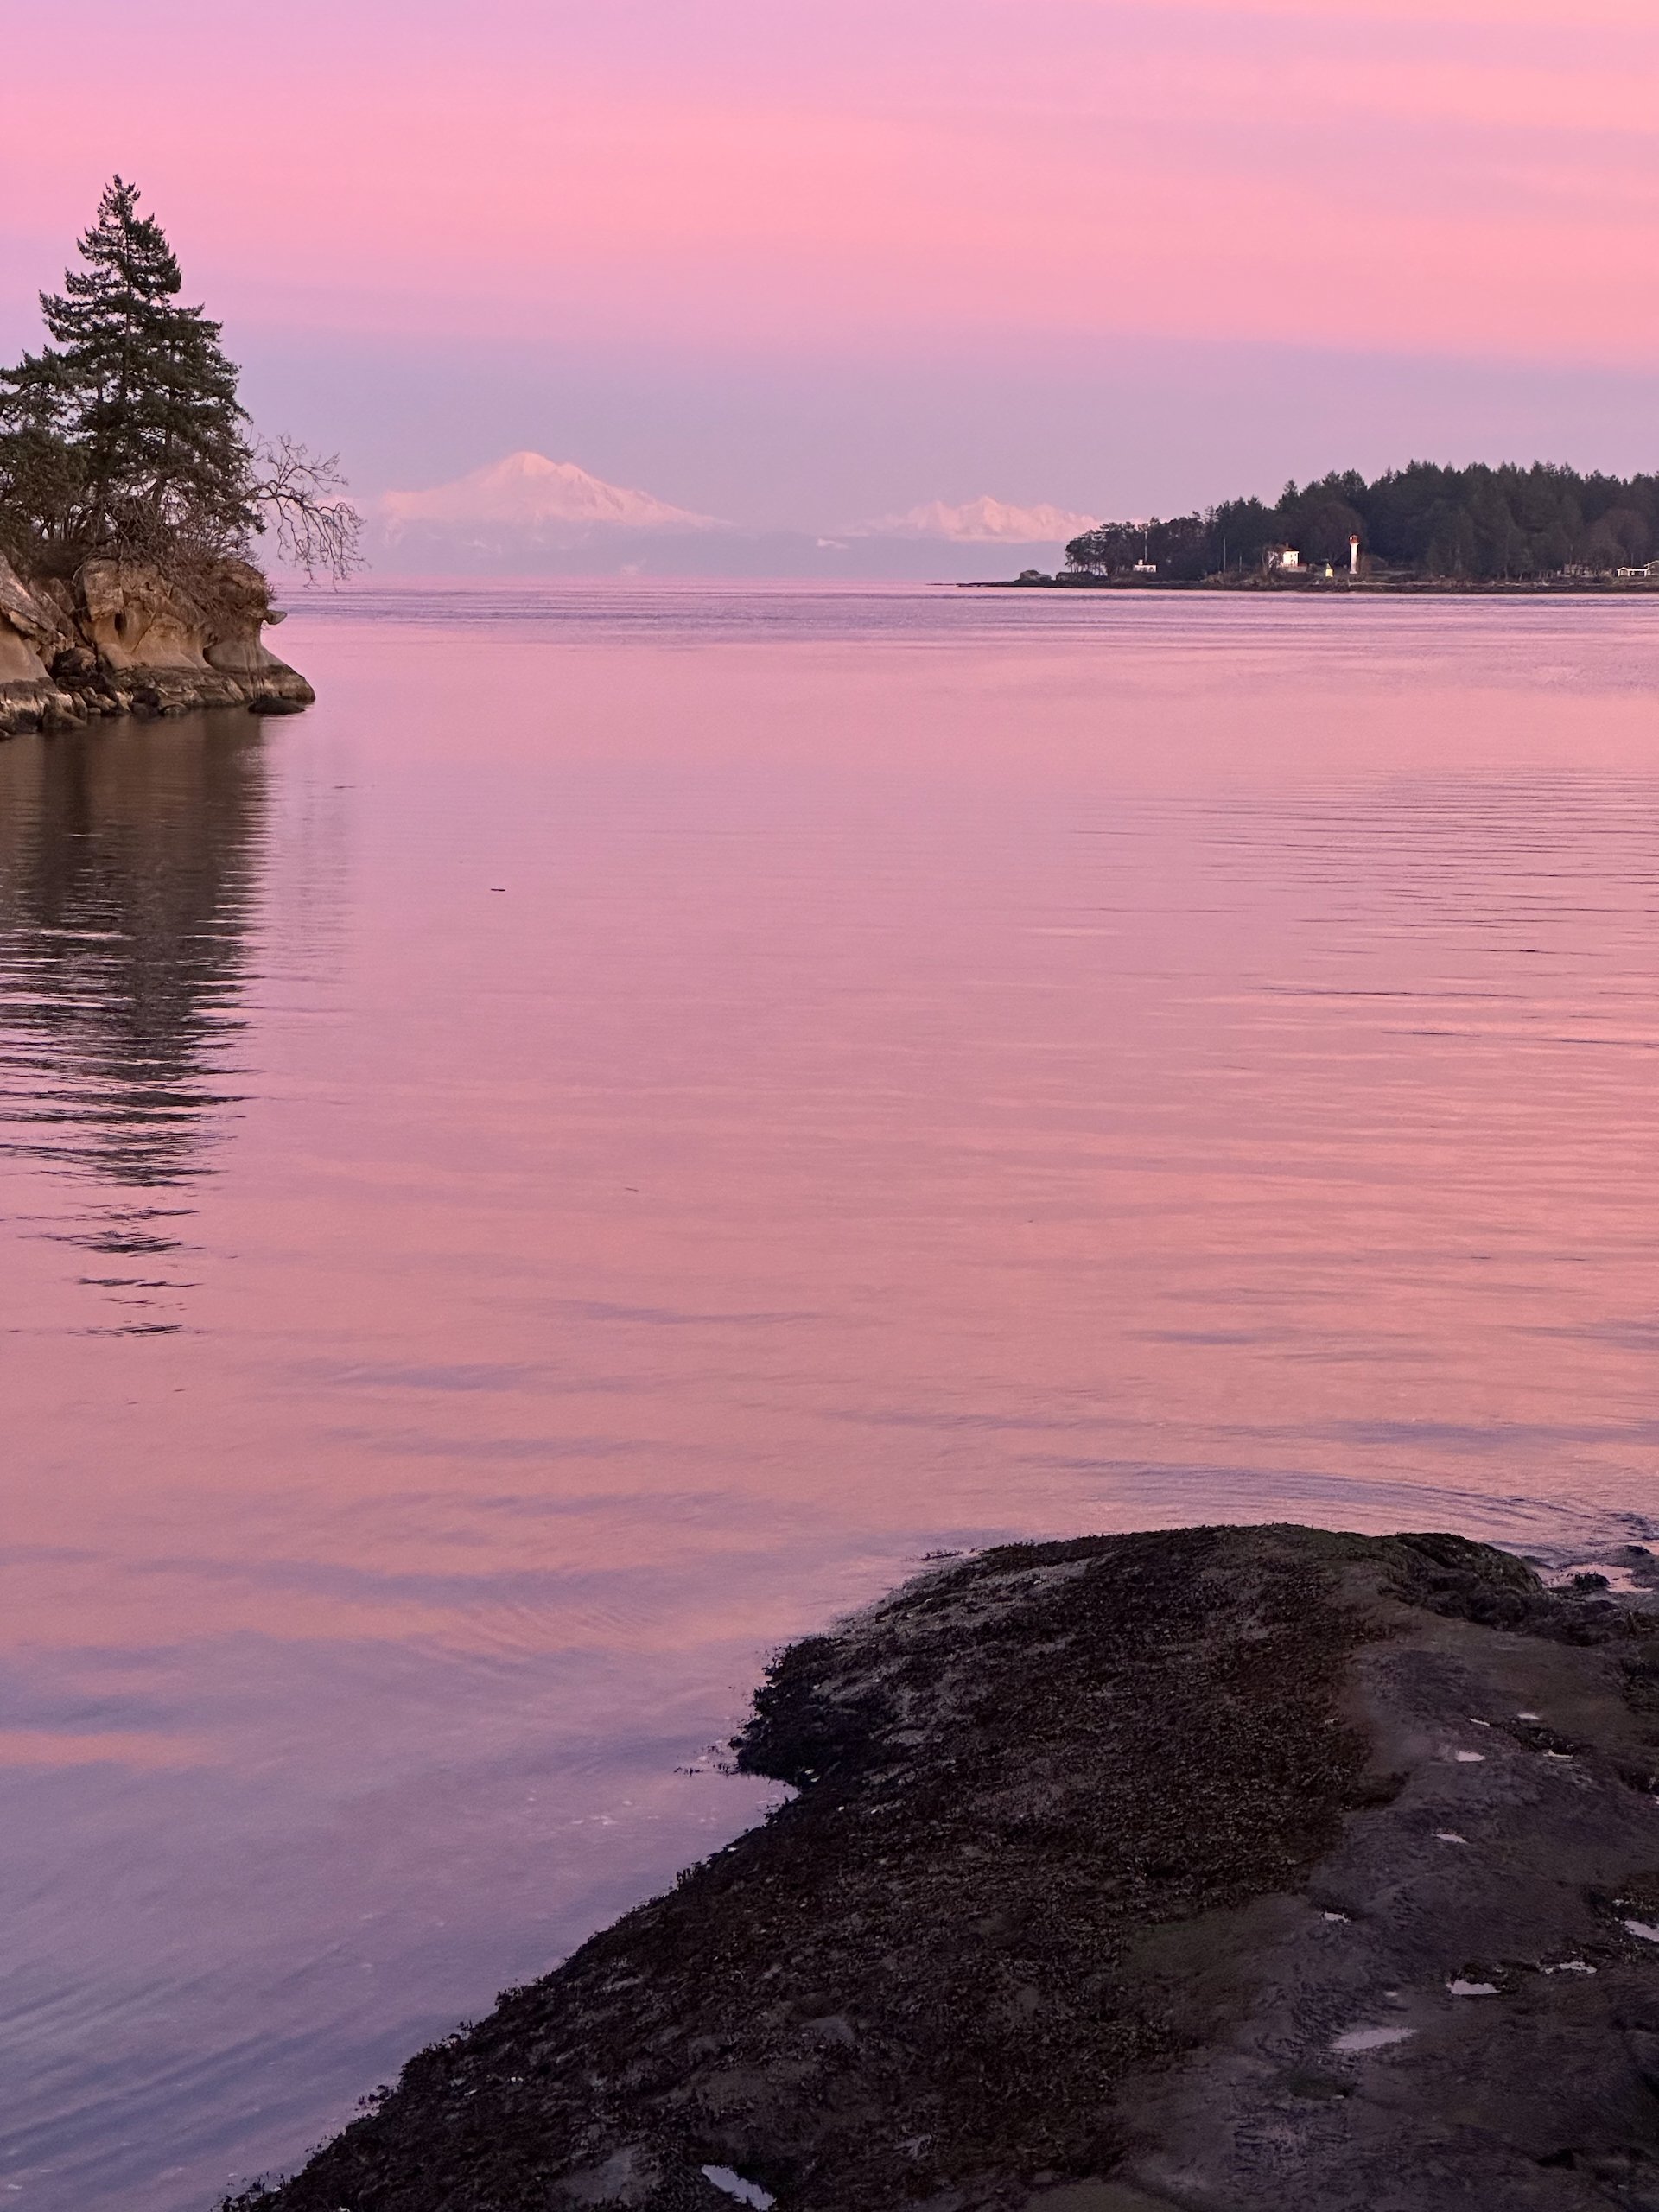  The sky was amazing, so pink! Mount Baker was looking very good off in the distance.  